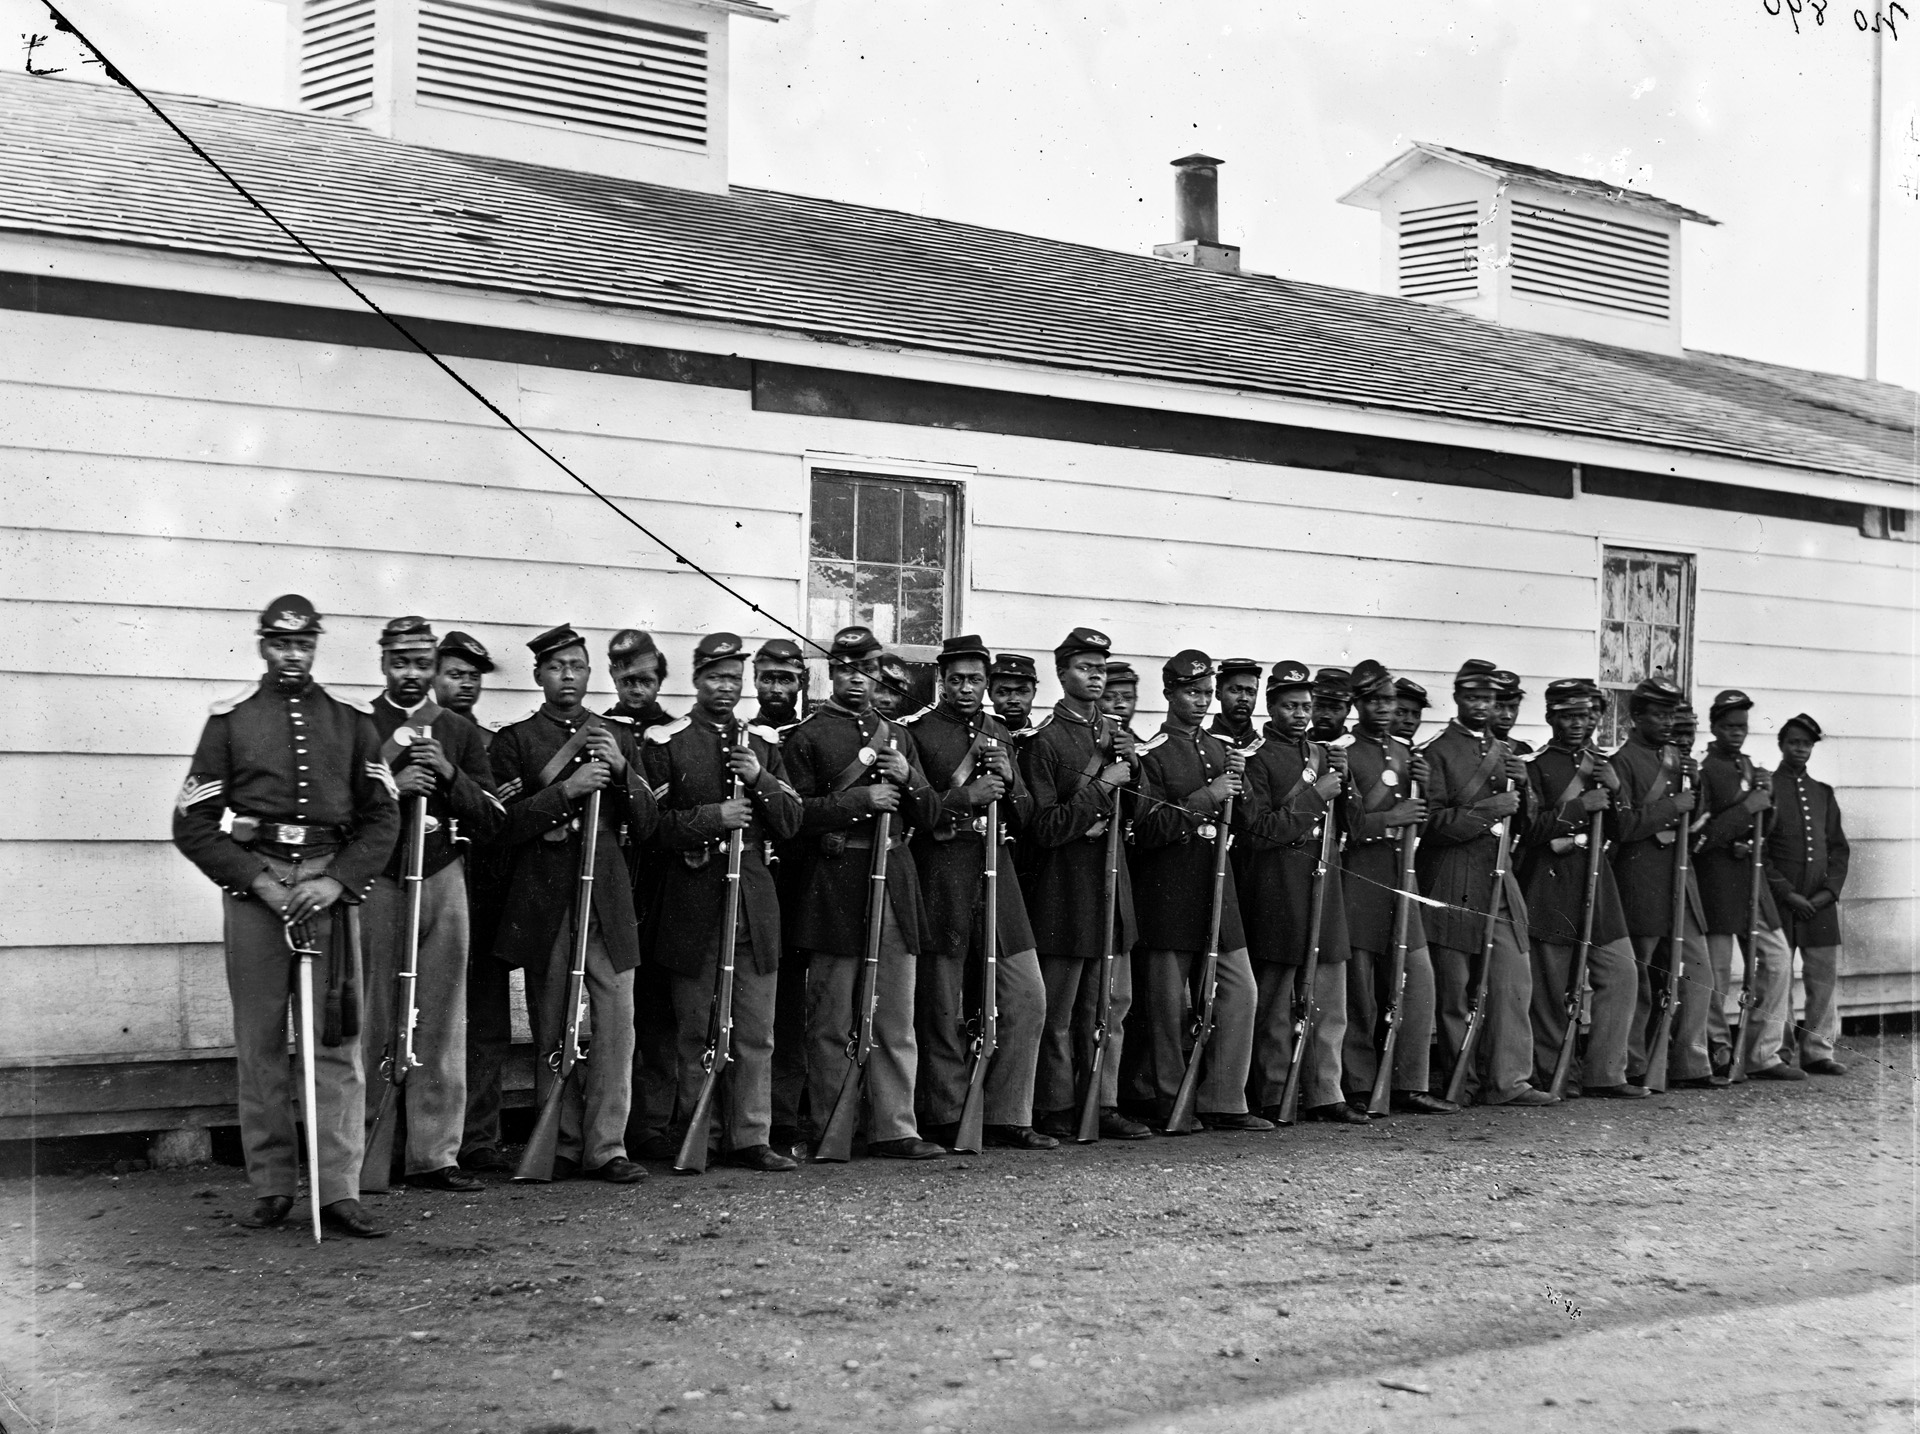 Soldiers of the 4th U.S. Colored Troops. The regiment participated in operations in Virginia and the coast of North Carolina.